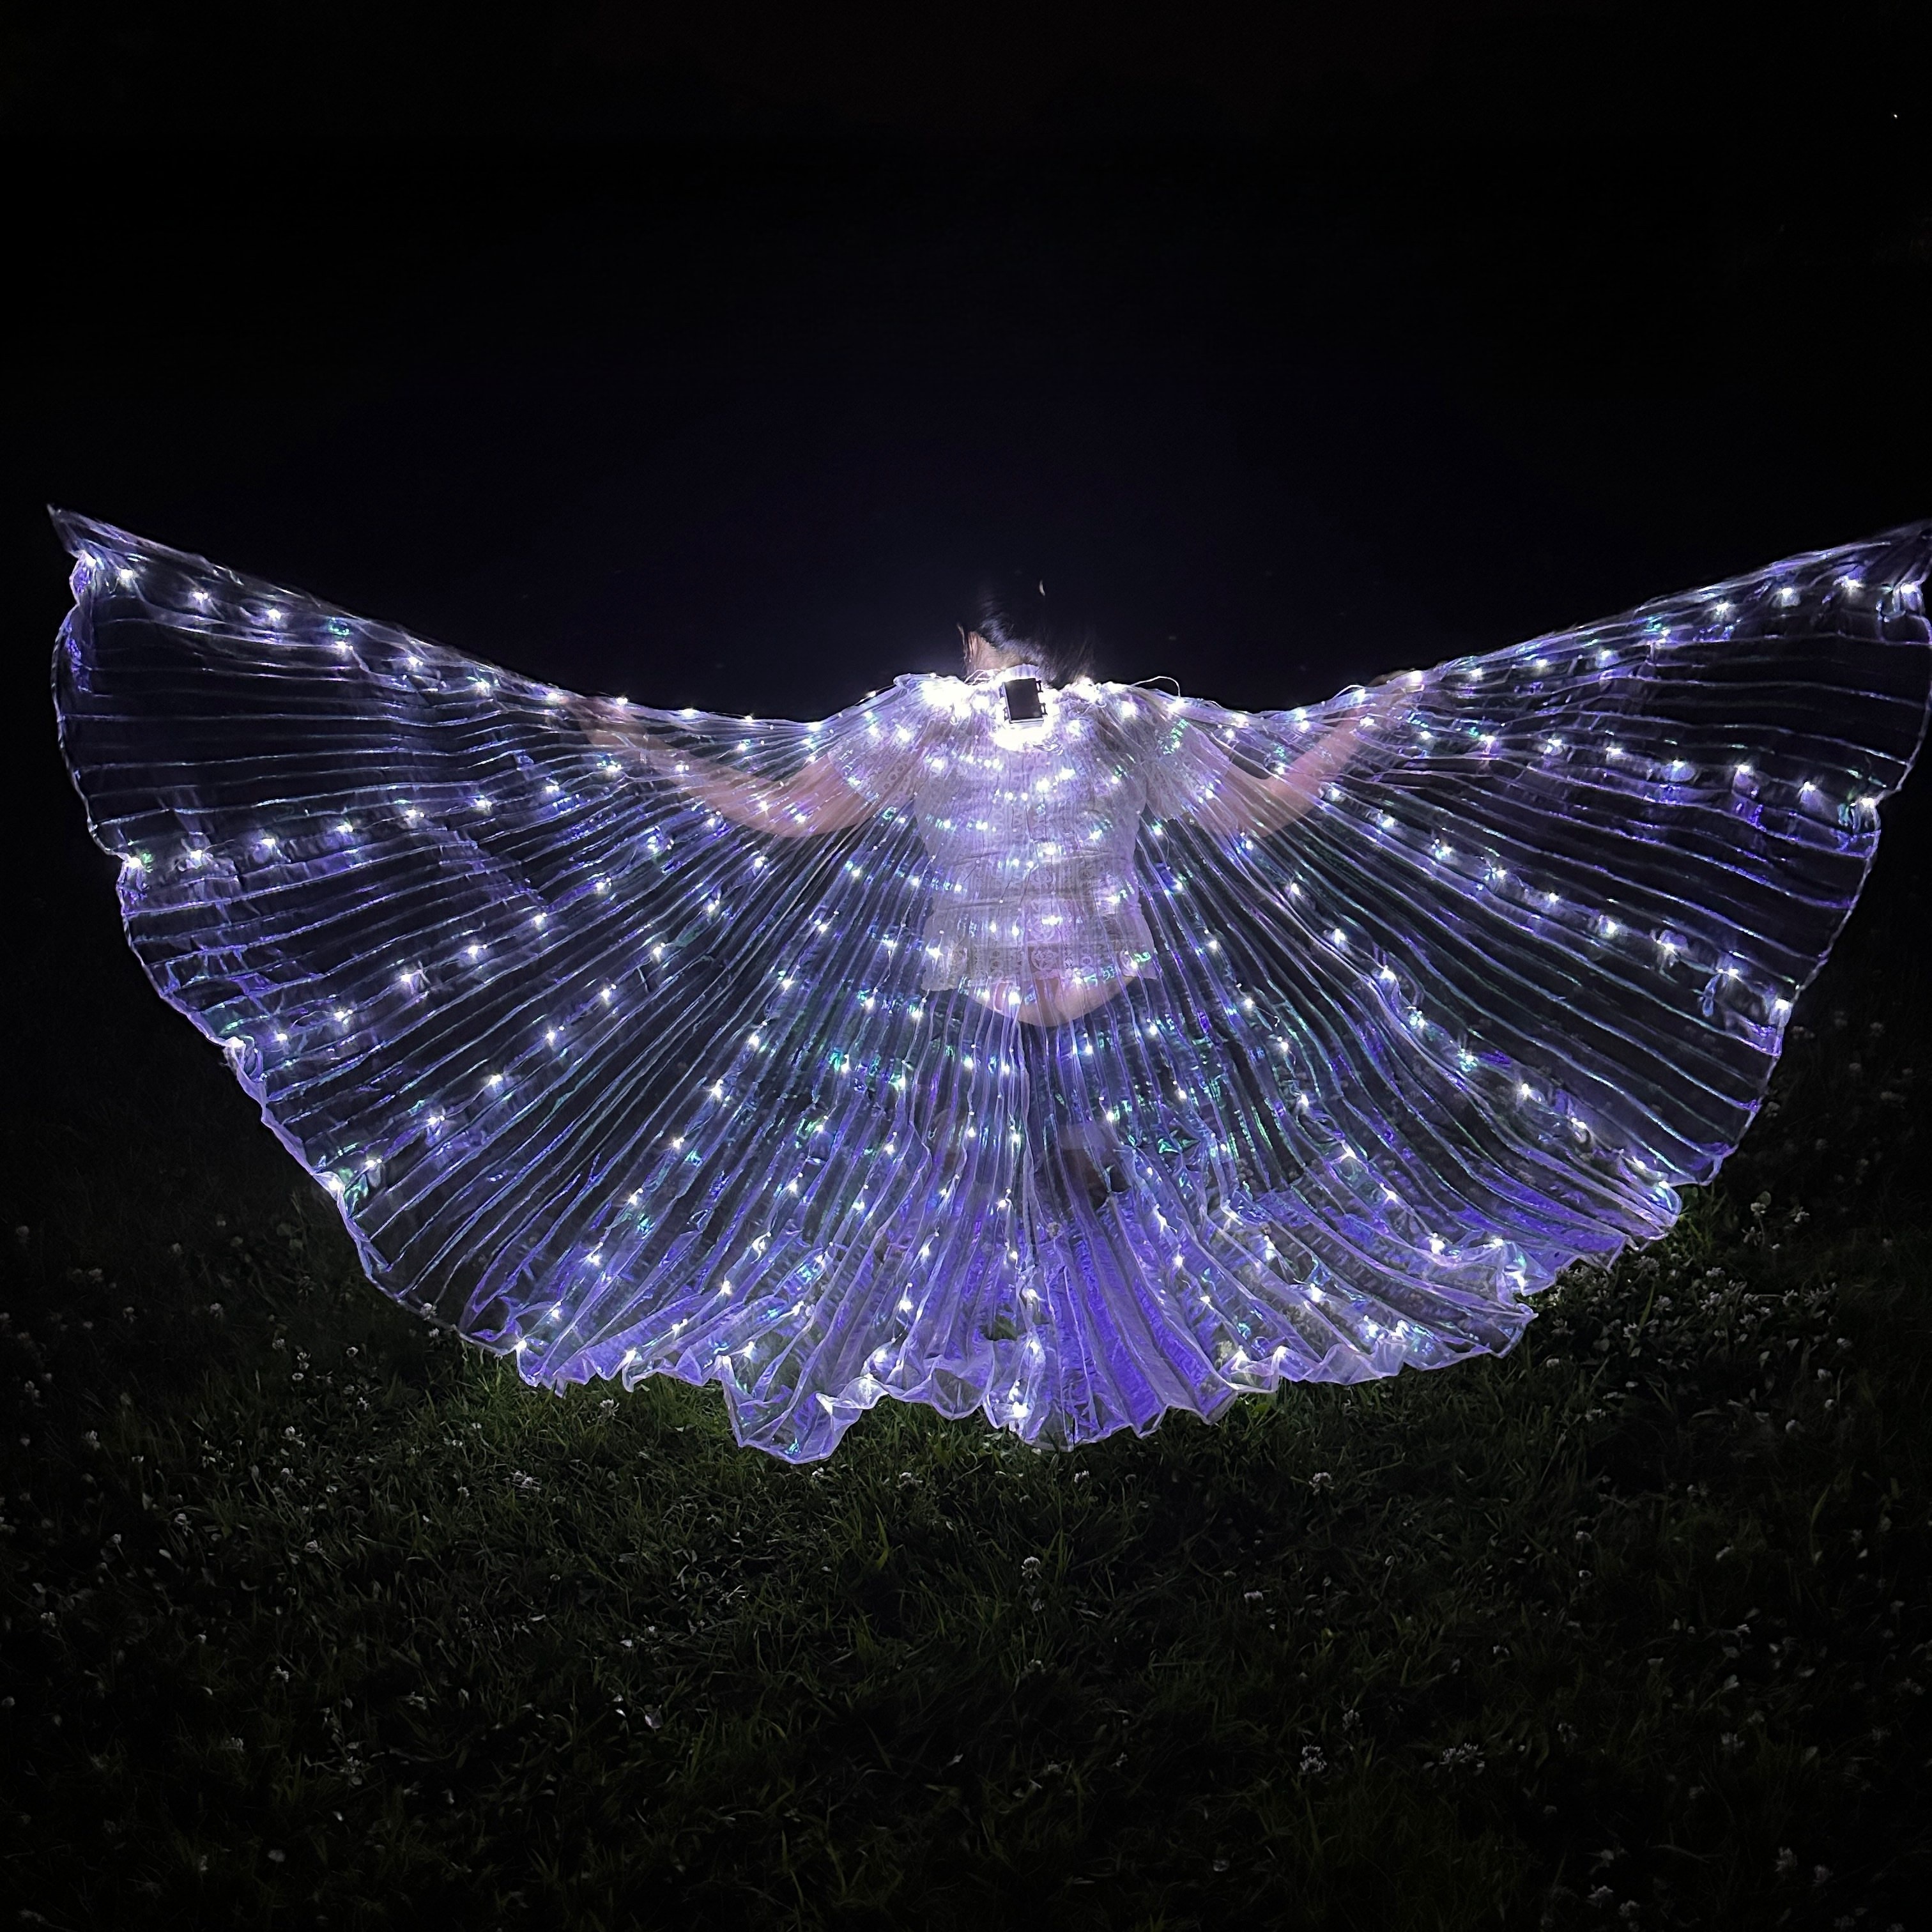 

Festive Glow Wings: 110cm/43in, Suitable For Ages 14+, Made Of Polyester Fabric And Plastic, No Battery Included